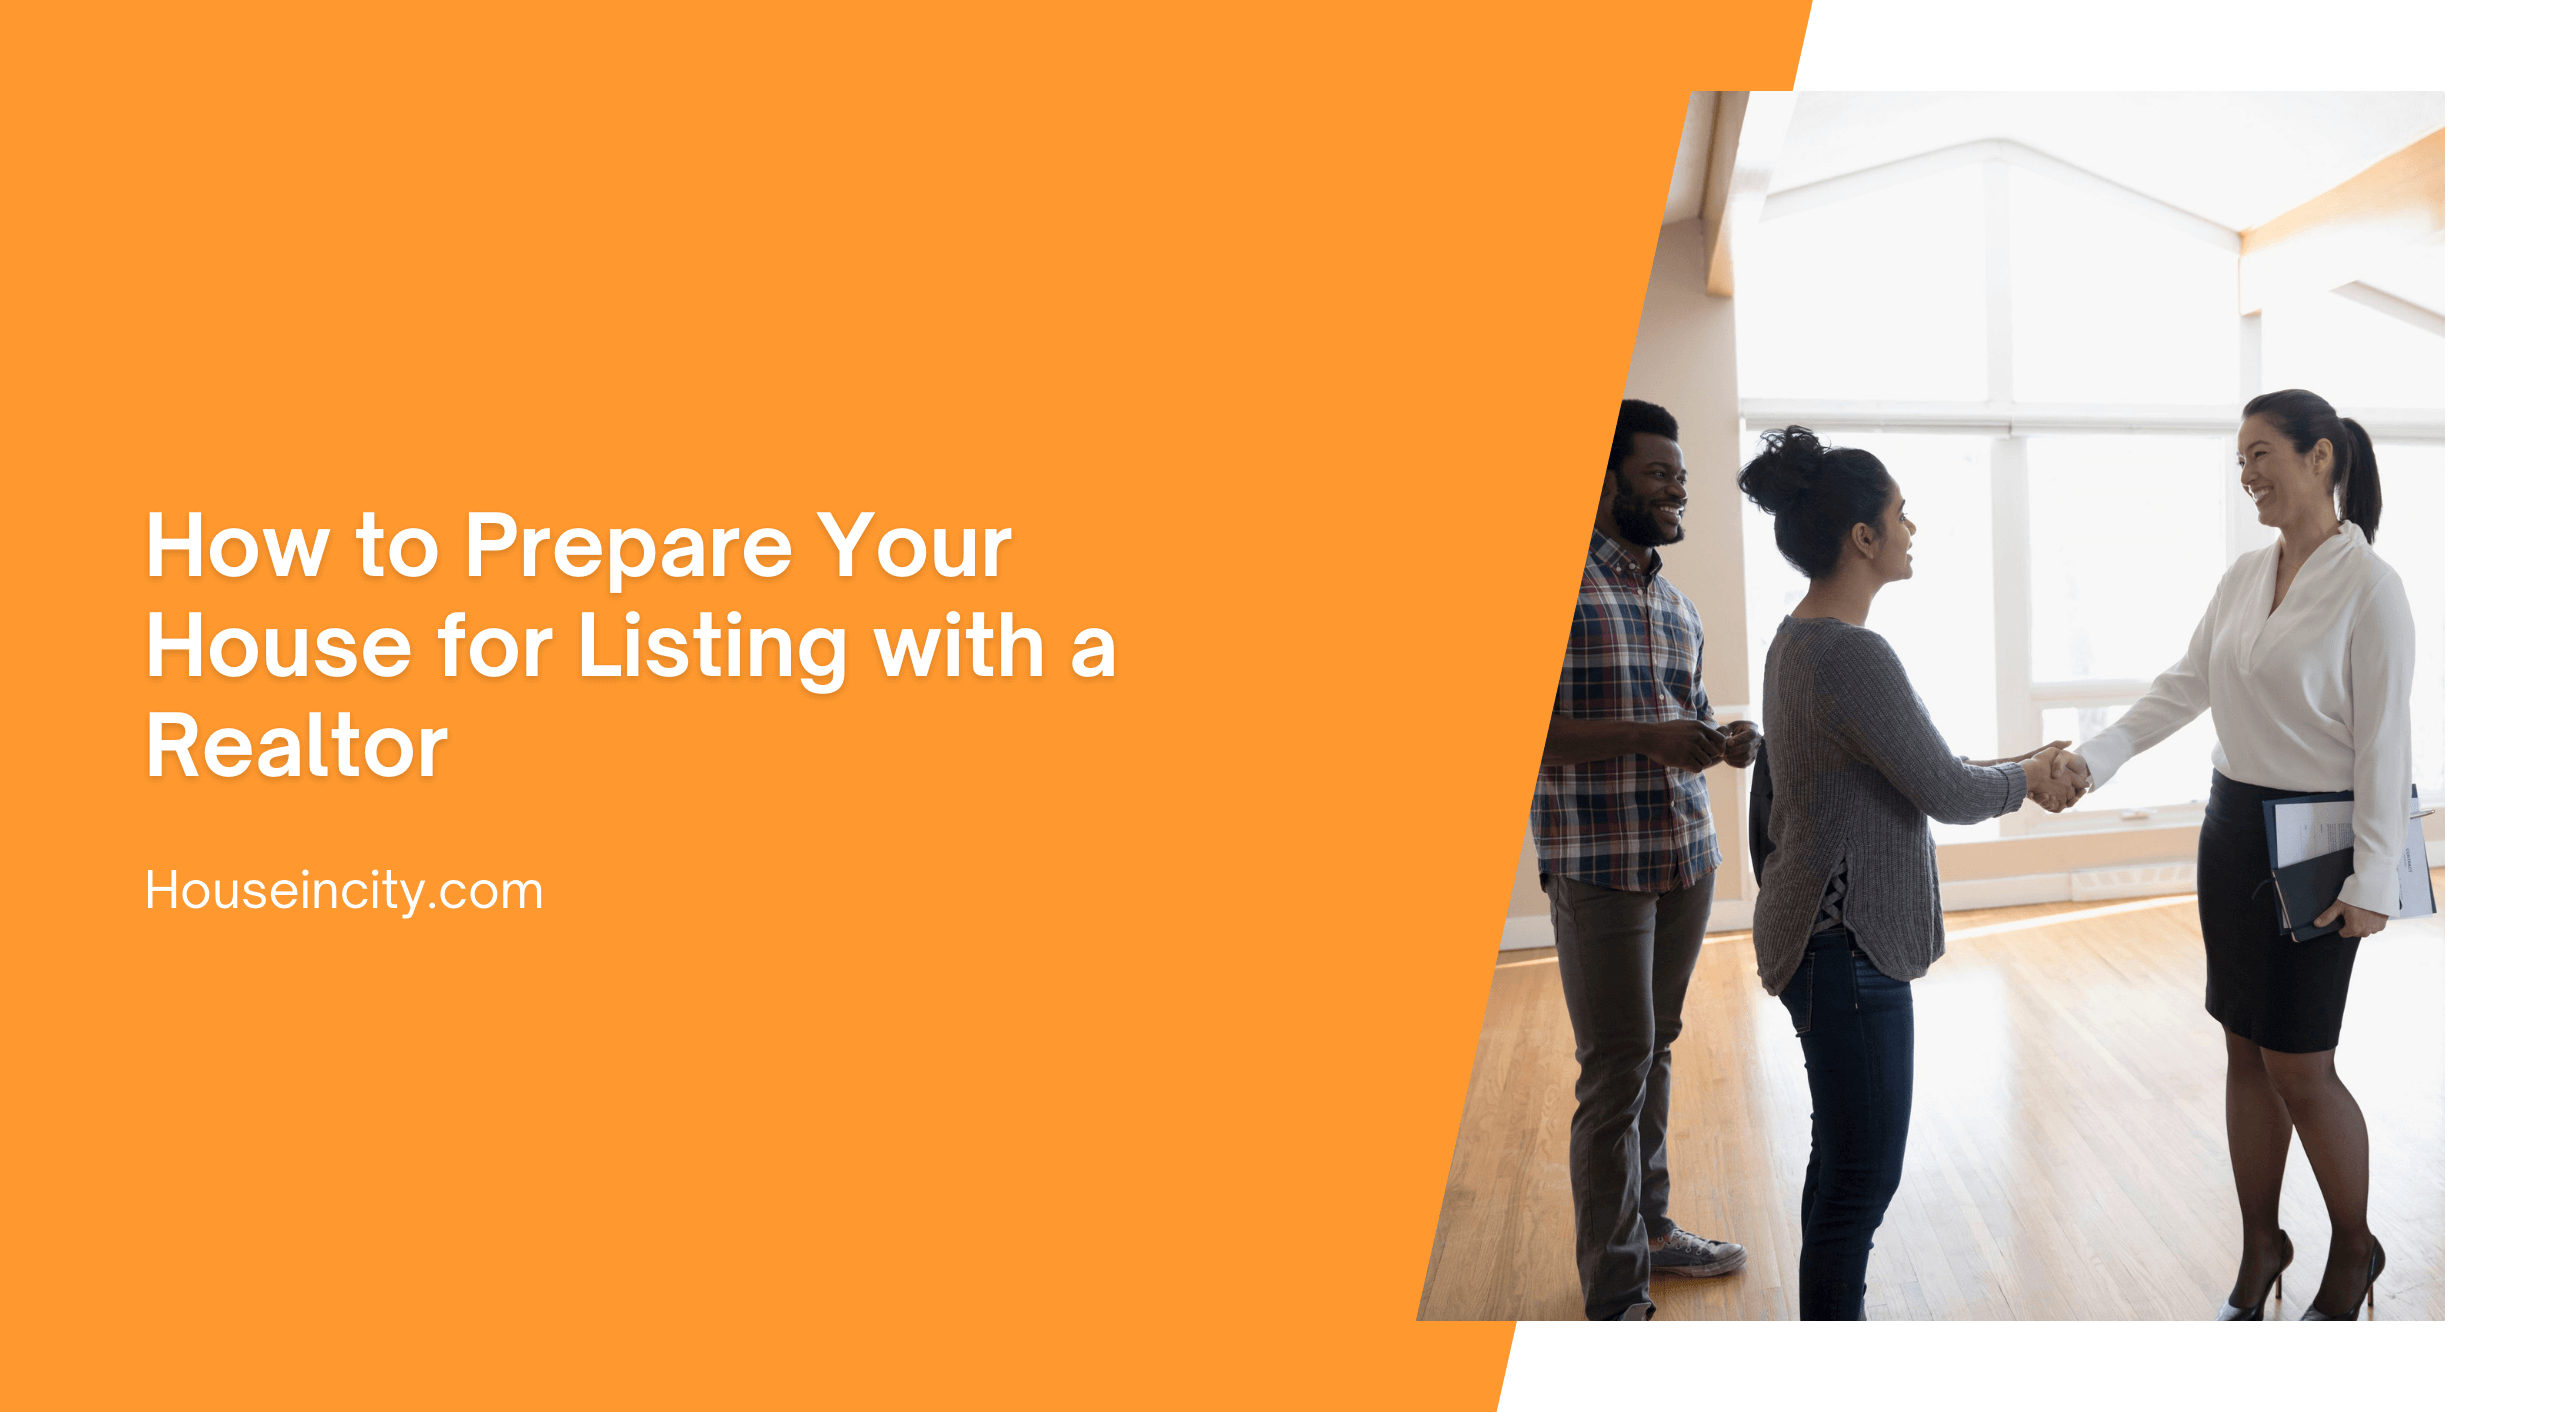 How to Prepare Your House for Listing with a Realtor